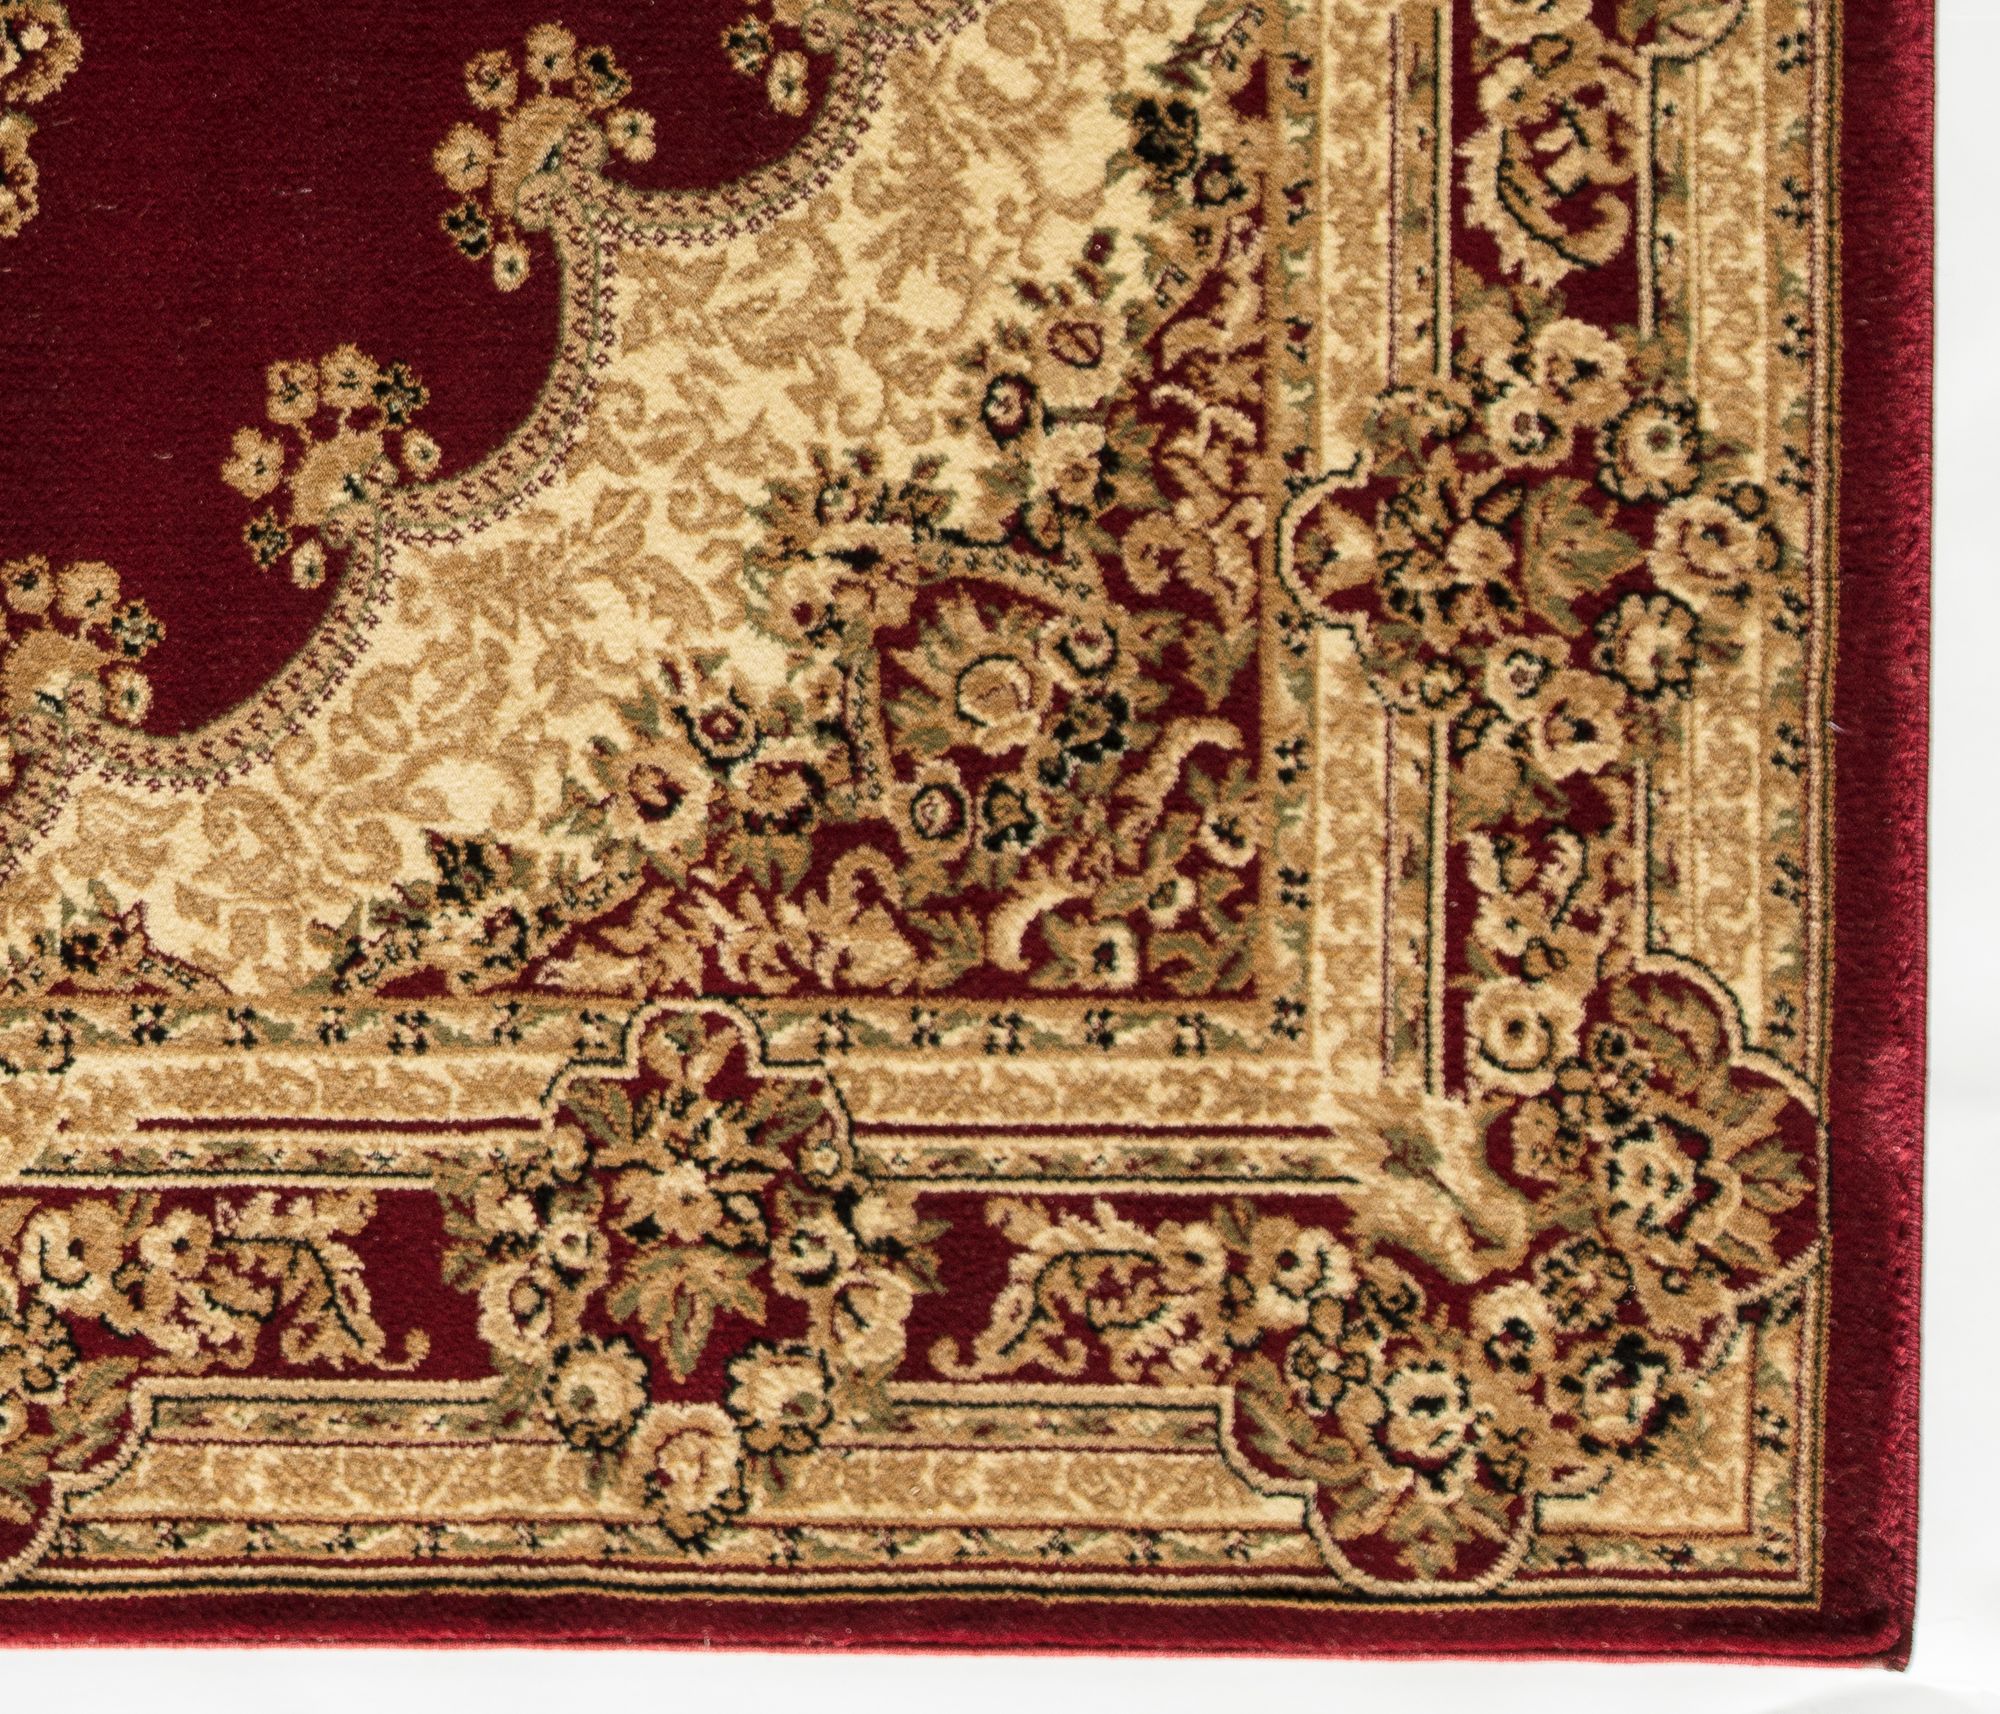 Rugs America Vista 807-RED Kerman Red Oriental Traditional Red Area Rug, 2'3"x7'10" - image 3 of 3